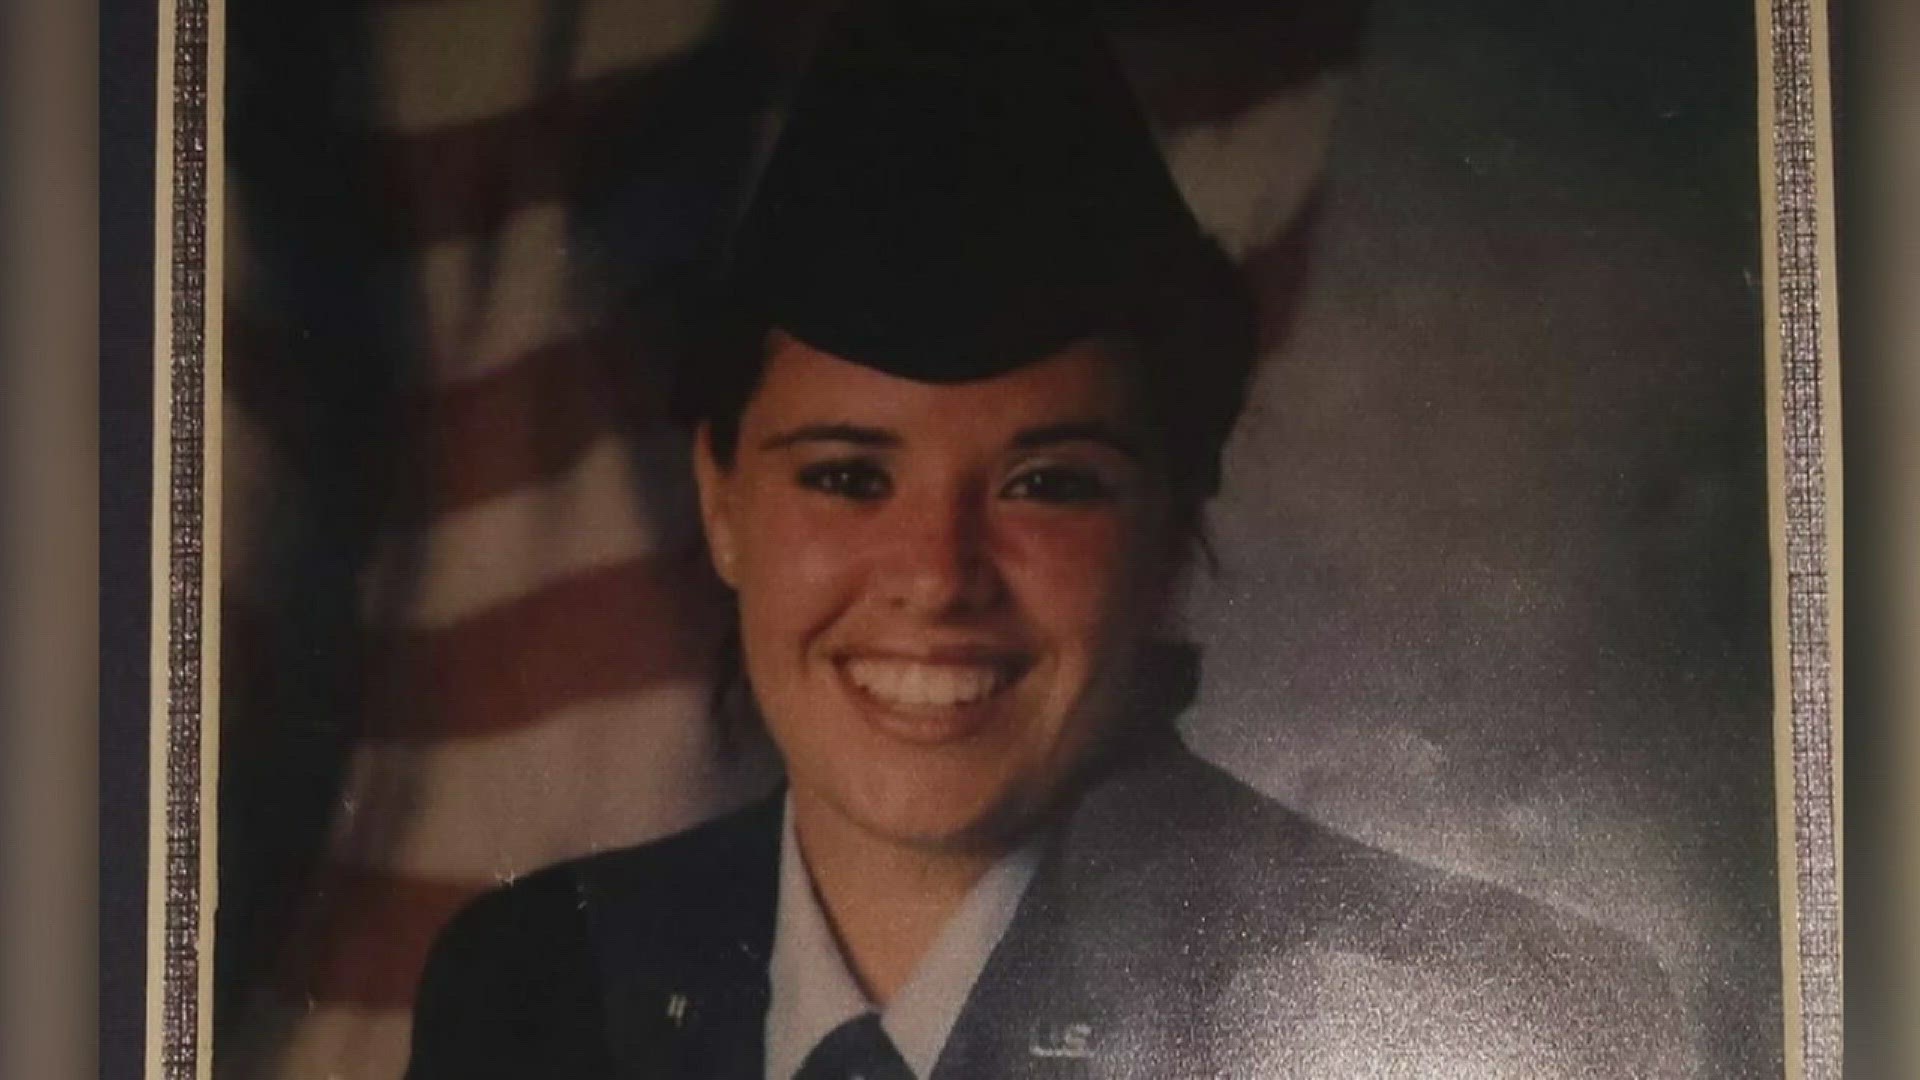 Dawn Ferrell, a Dallas native, joined the U.S. Air Force right after high school.